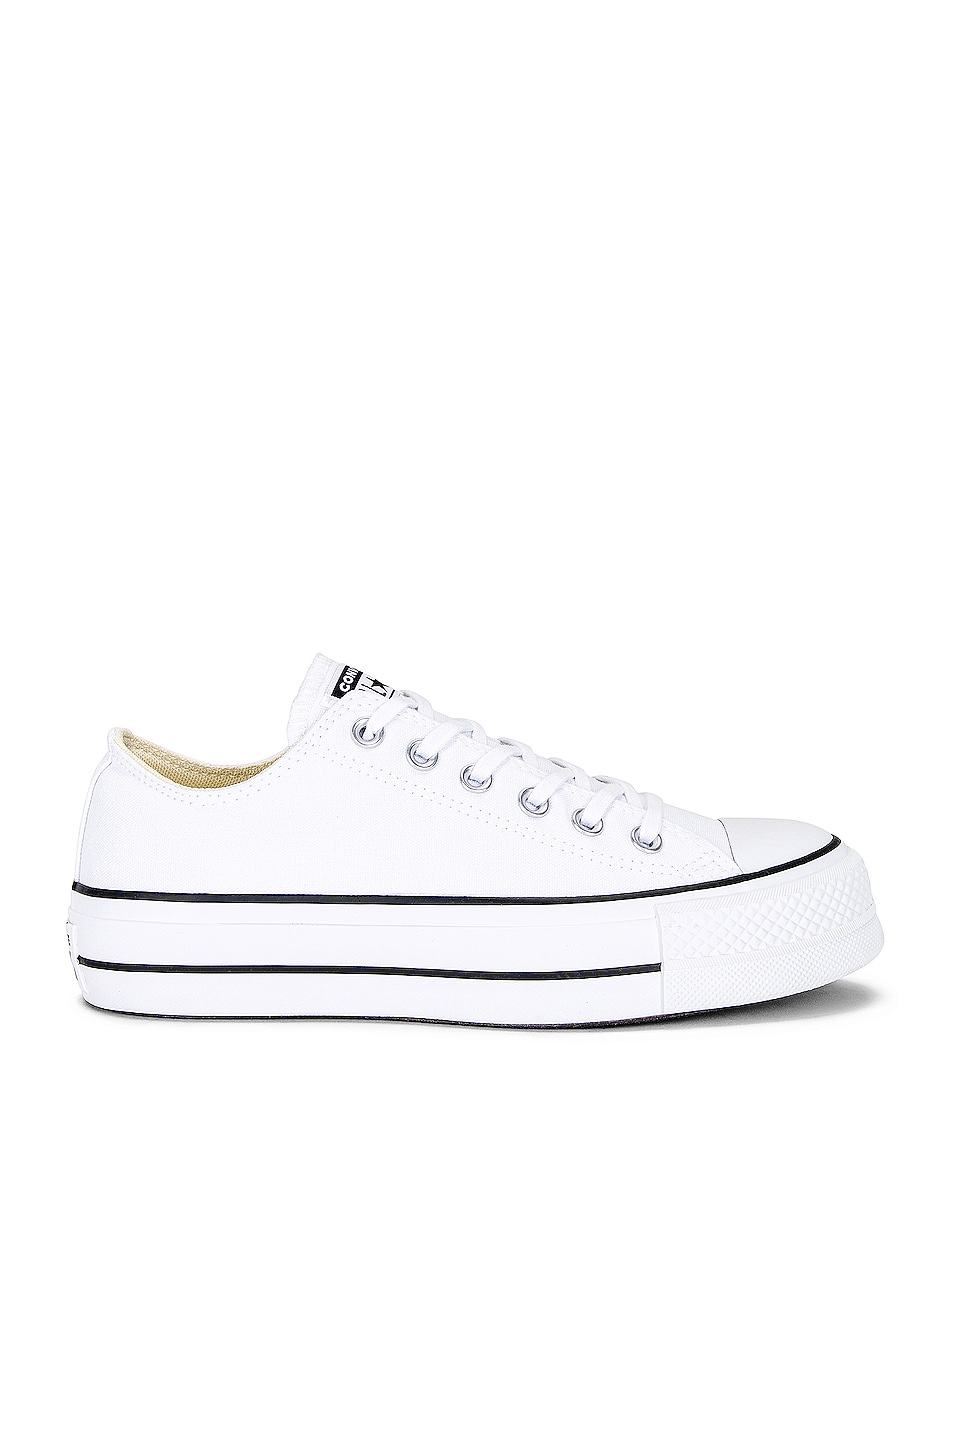 Image 1 of Converse Chuck Taylor All Star Platform Canvas Low Tops in White & Black